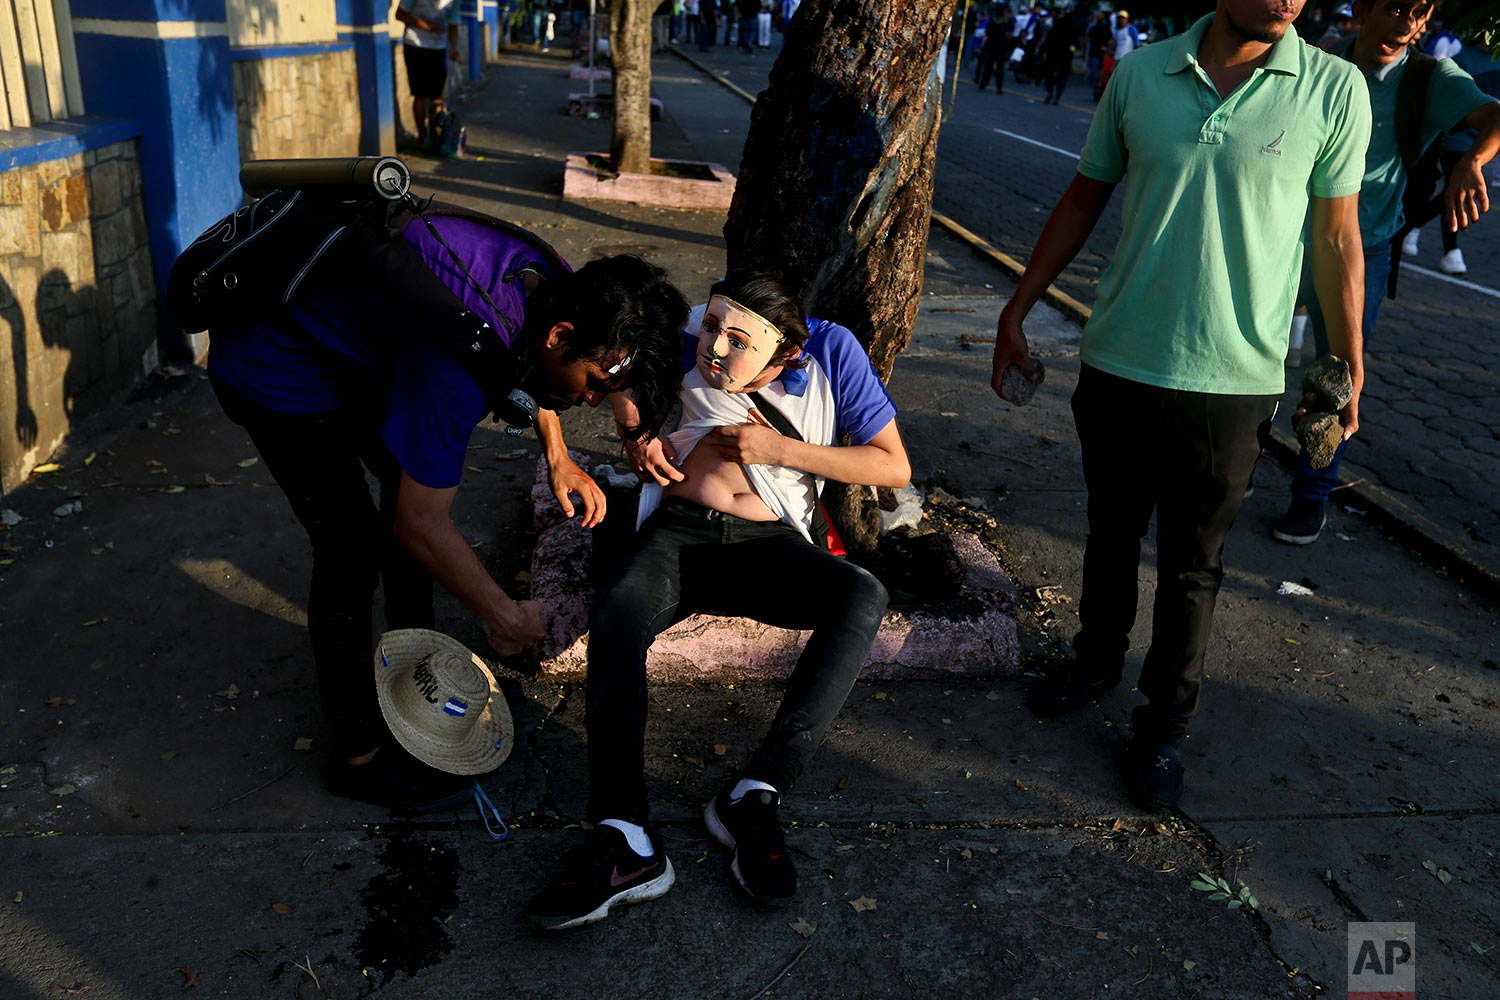  In this May 30, 2018 photo, a masked protester takes stock of his injury after  clashes with  police and government supporters in Managua, Nicaragua, during a march commemorating mother's day, and in honor mothers' children who have died during ongo